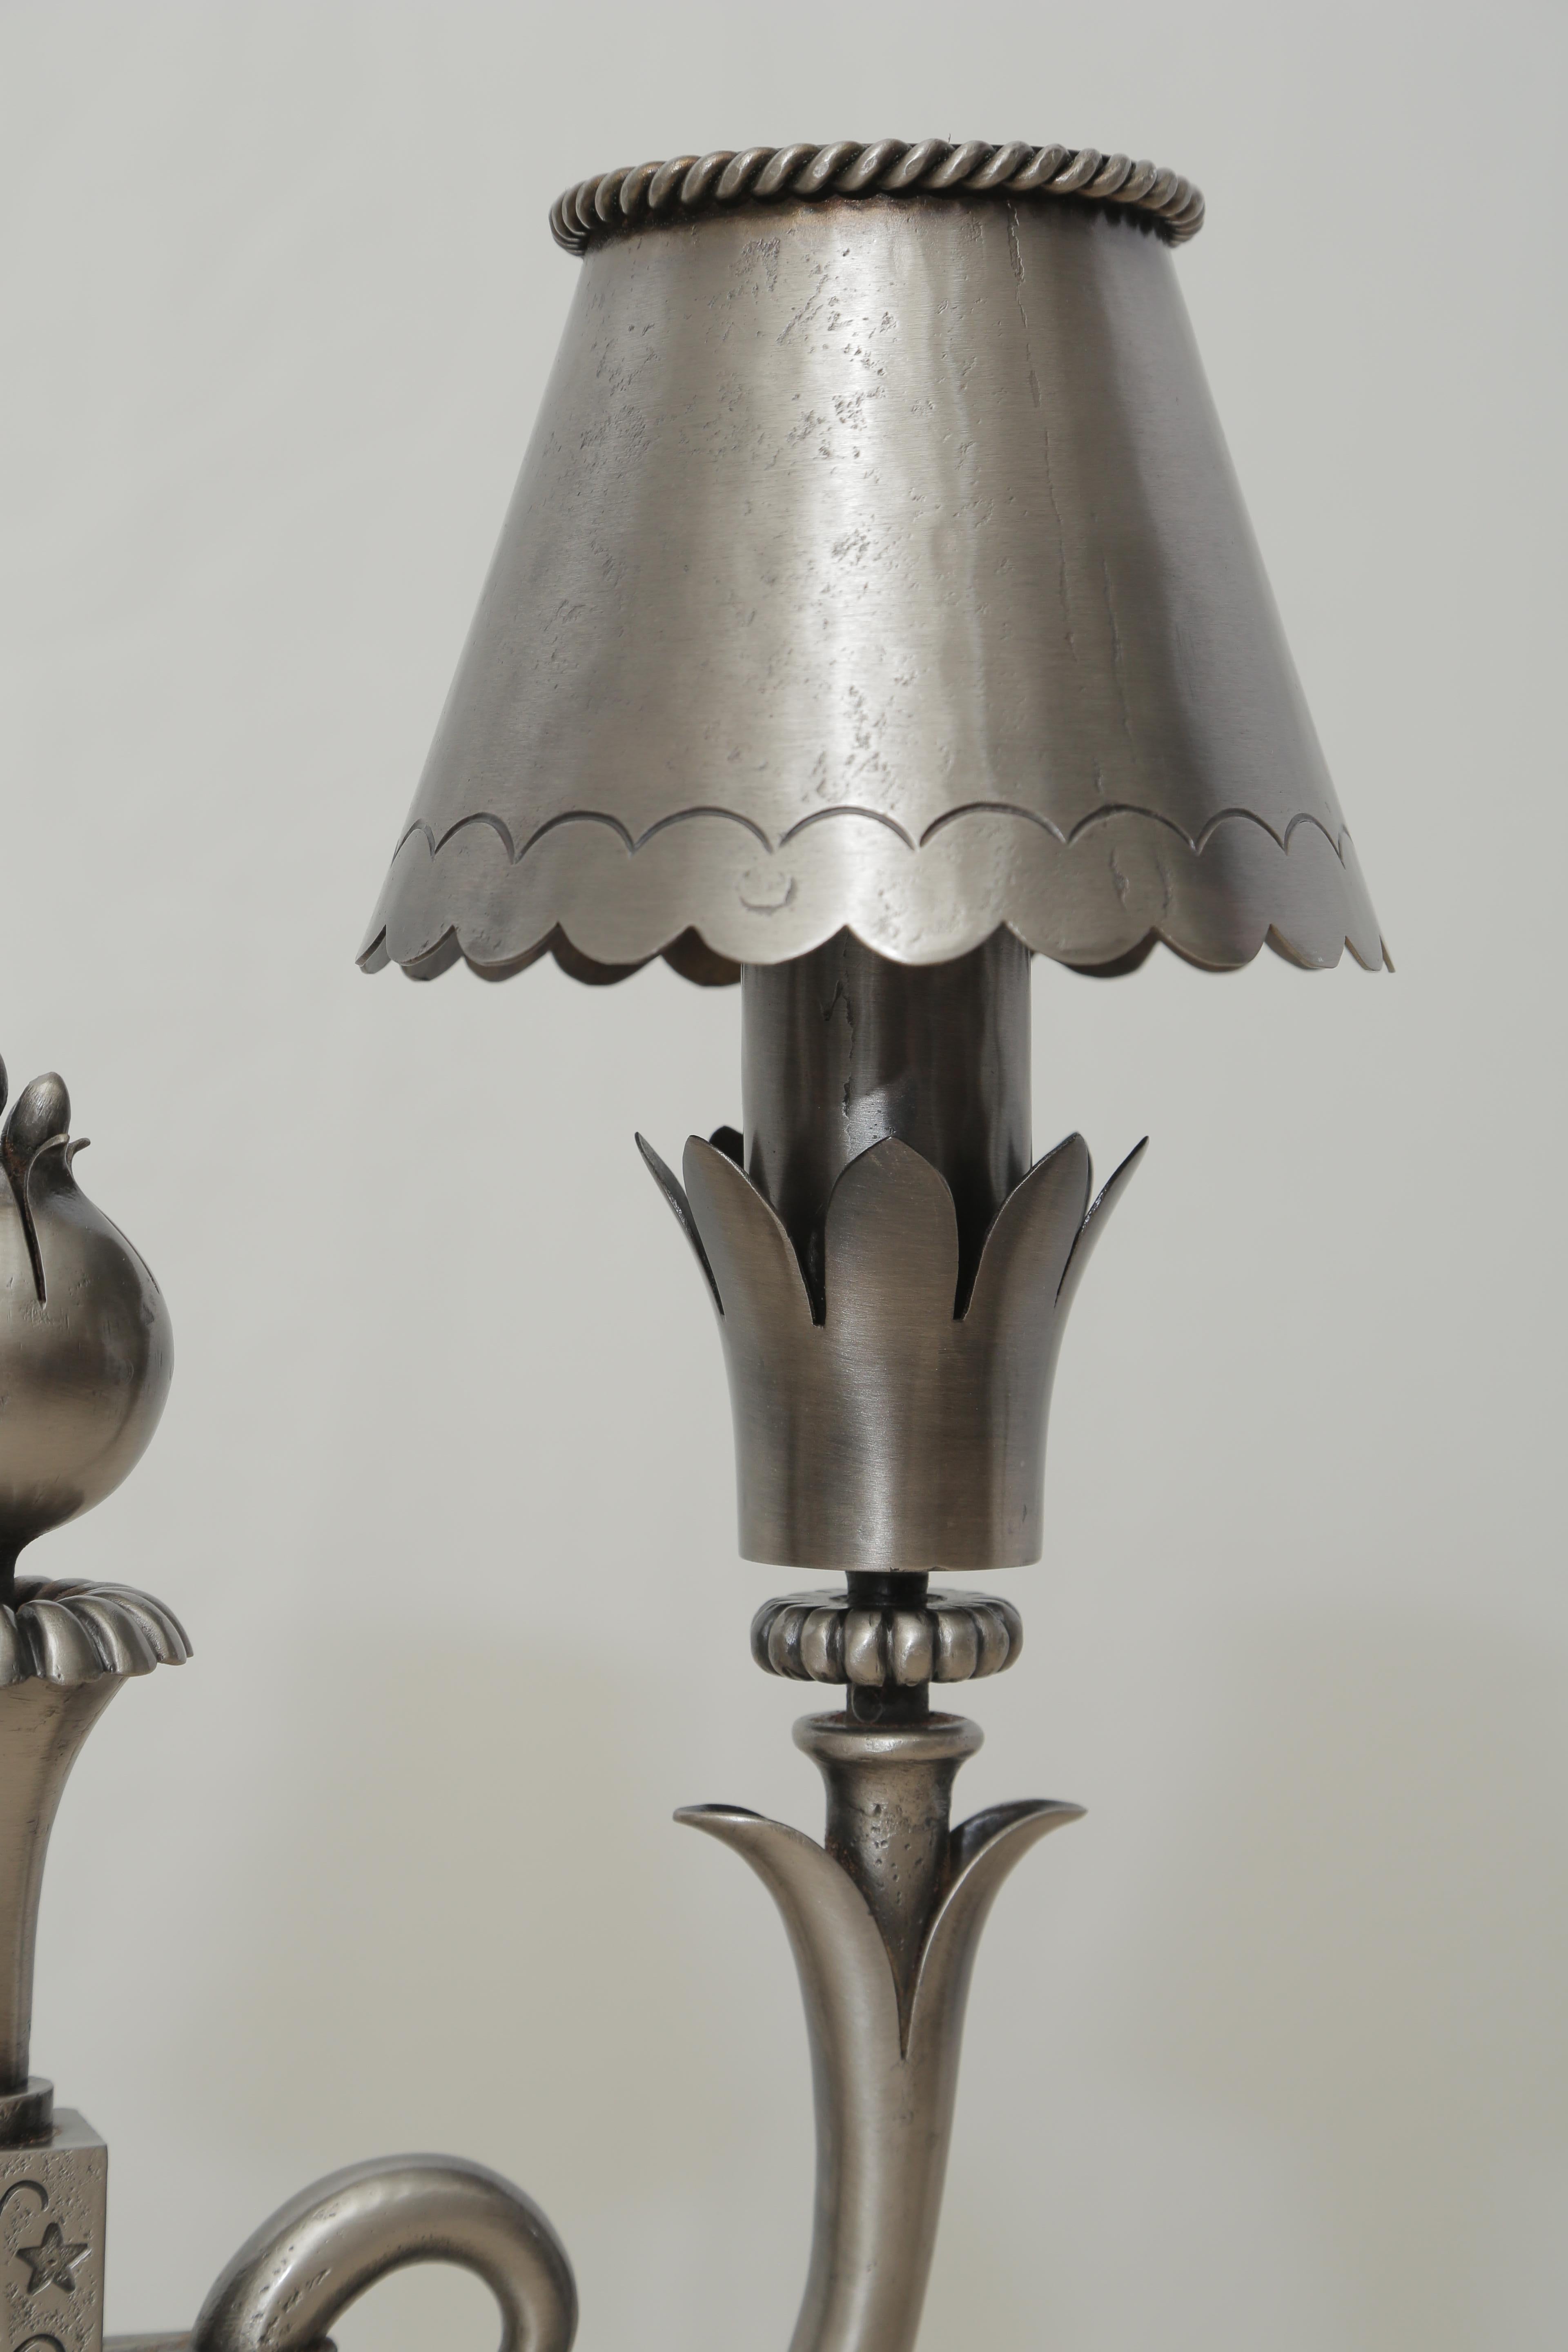 Mid-Century Modern Pair of Midcentury Polished Wrought Iron Table Lamps Attributed to Poillerat